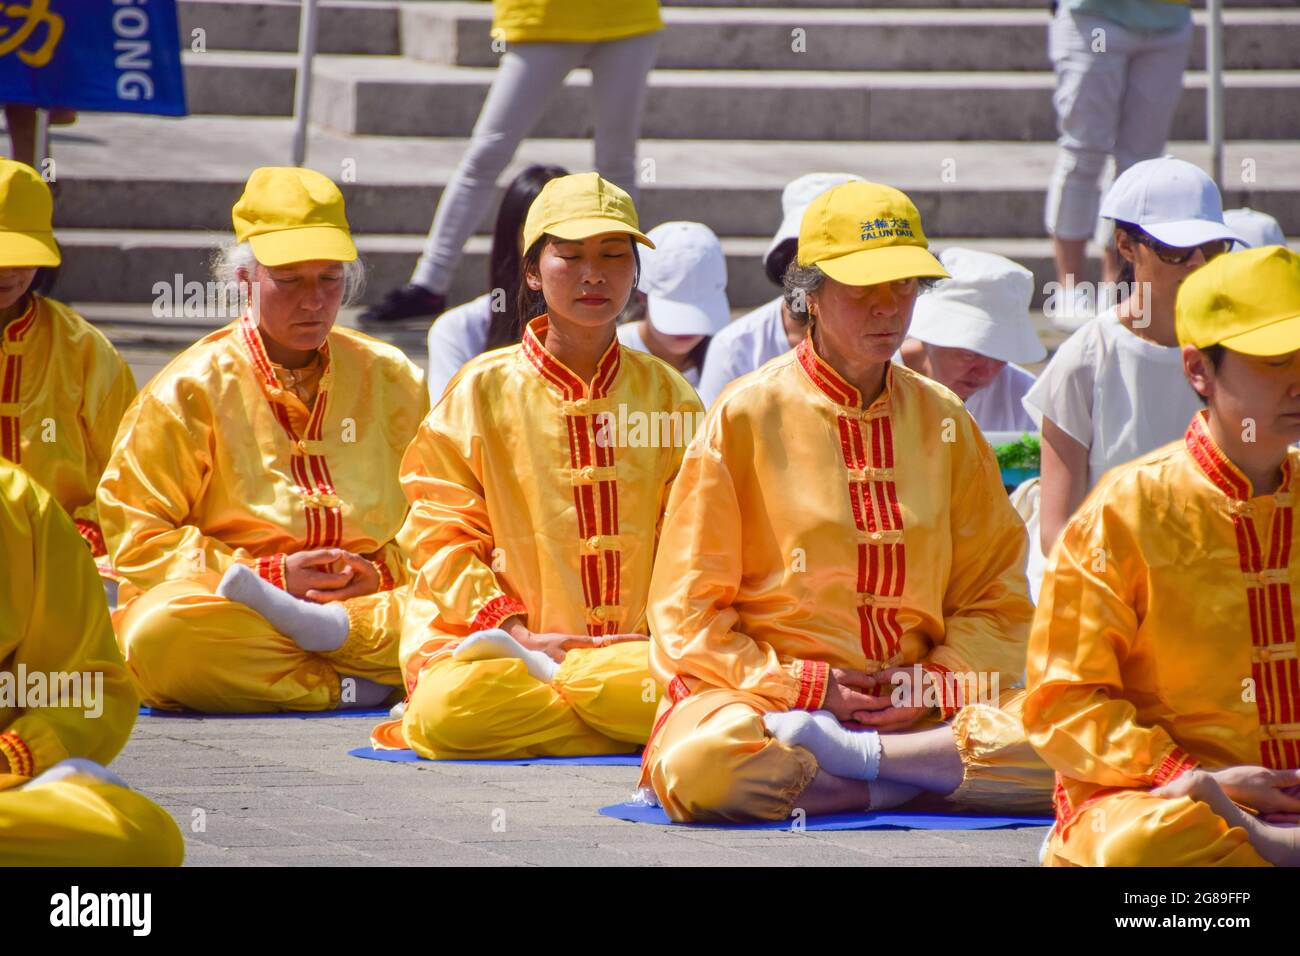 London, United Kingdom. 18th July 2021. Falun Gong practitioners and supporters gathered outside the Houses of Parliament to protest against the Chinese government's persecution, according to the protesters, of Falun Gong (also known as Falun Dafa) meditation practitioners, through abductions, imprisonment, torture, and organ harvesting. (Credit: Vuk Valcic / Alamy Live News) Stock Photo